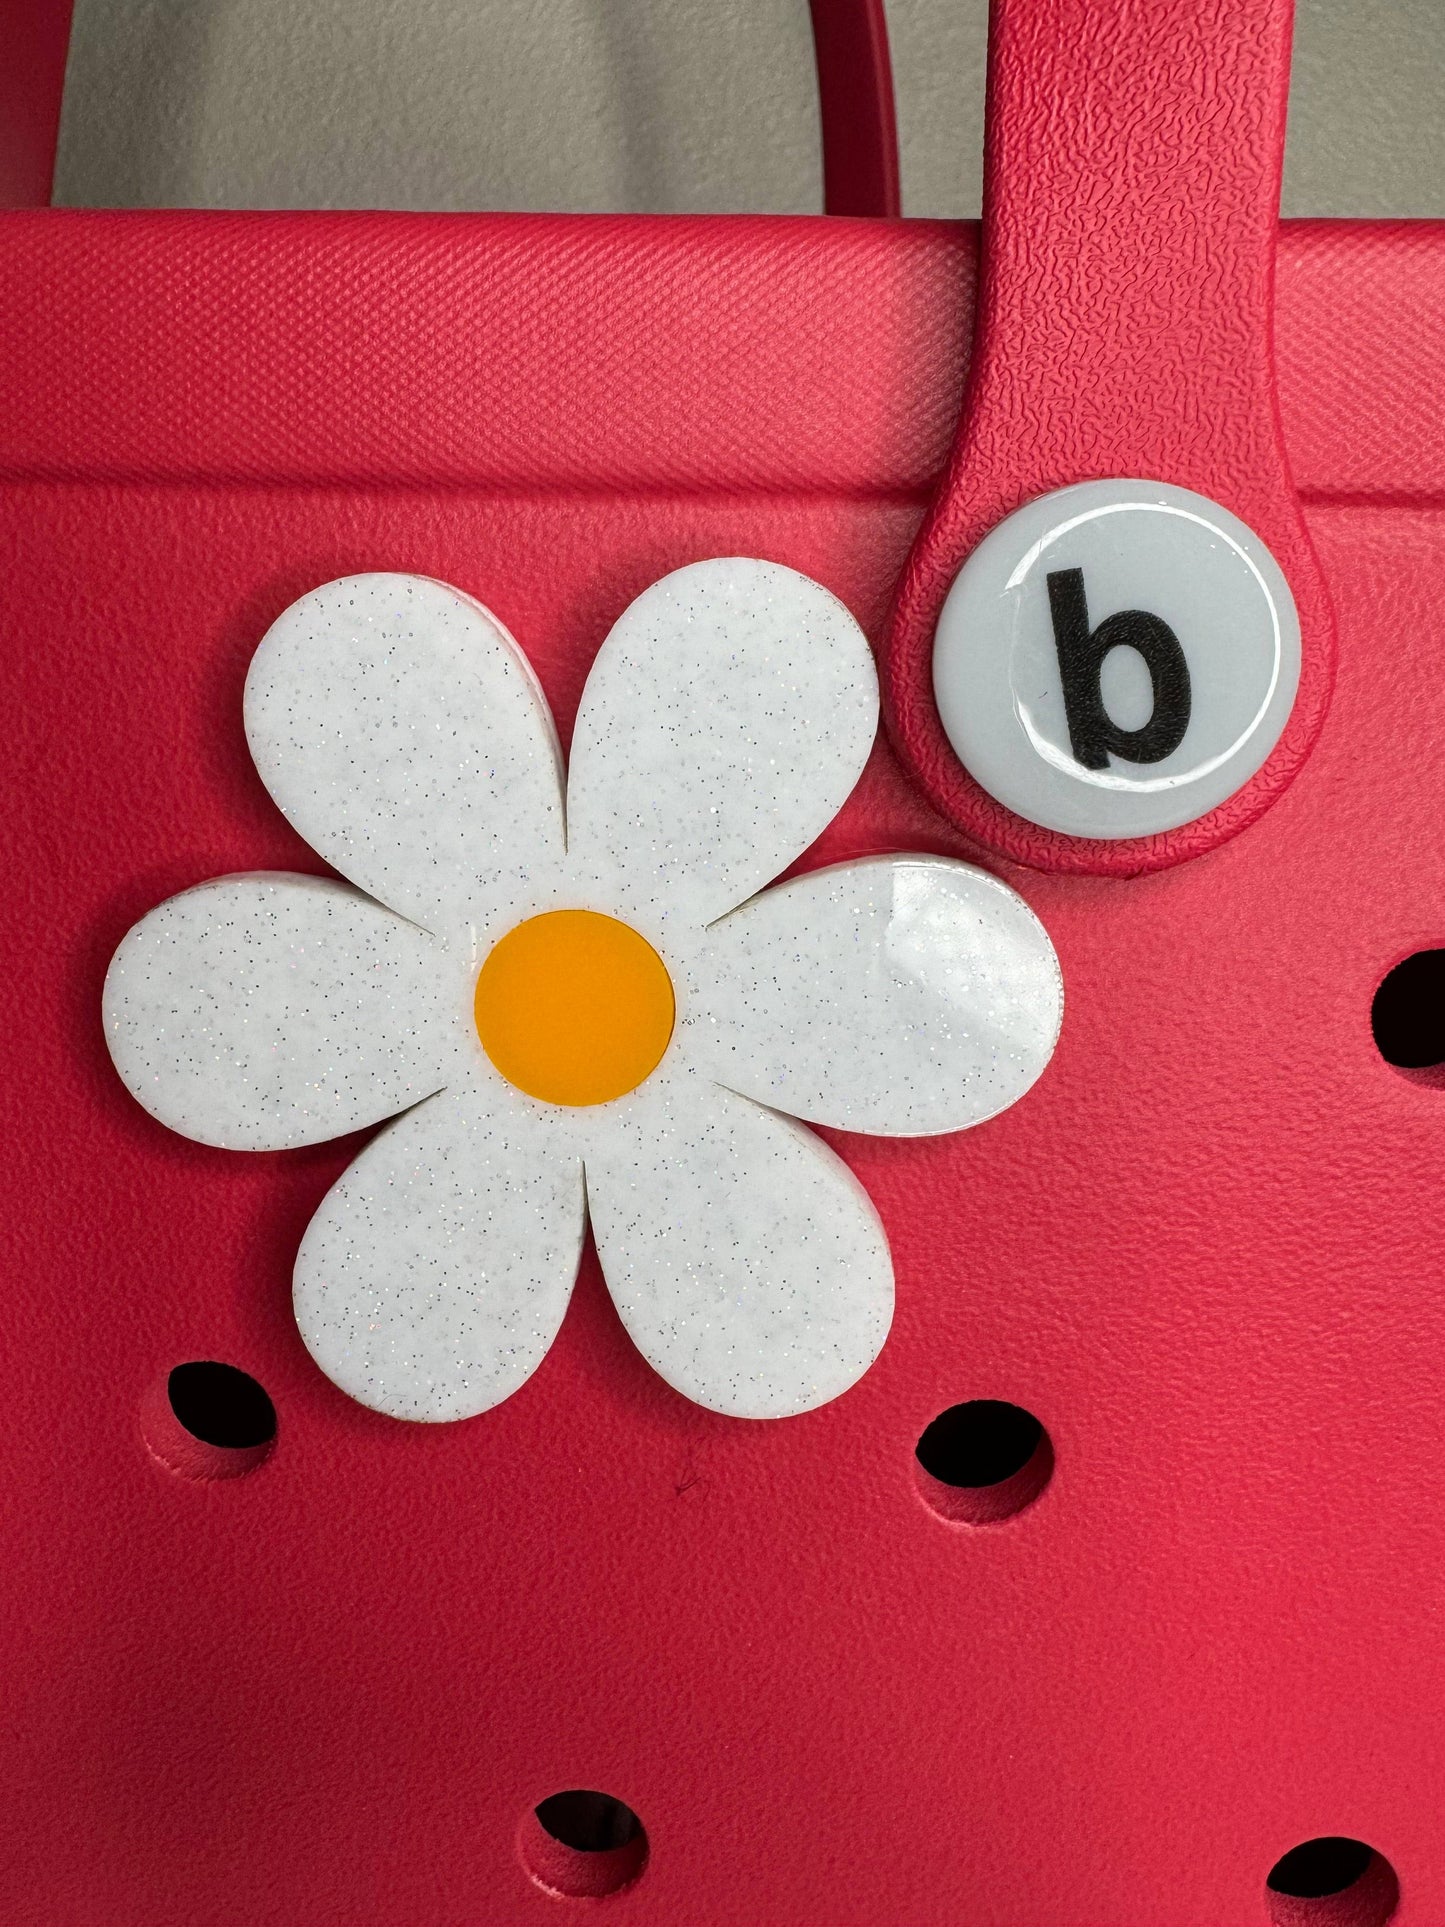 Glitter Daisy Charm for Bogg Bags - Sparkly Flower Bag Accessory - Floral Bogg Bag Charm - Spring Accessory - Gift for Her